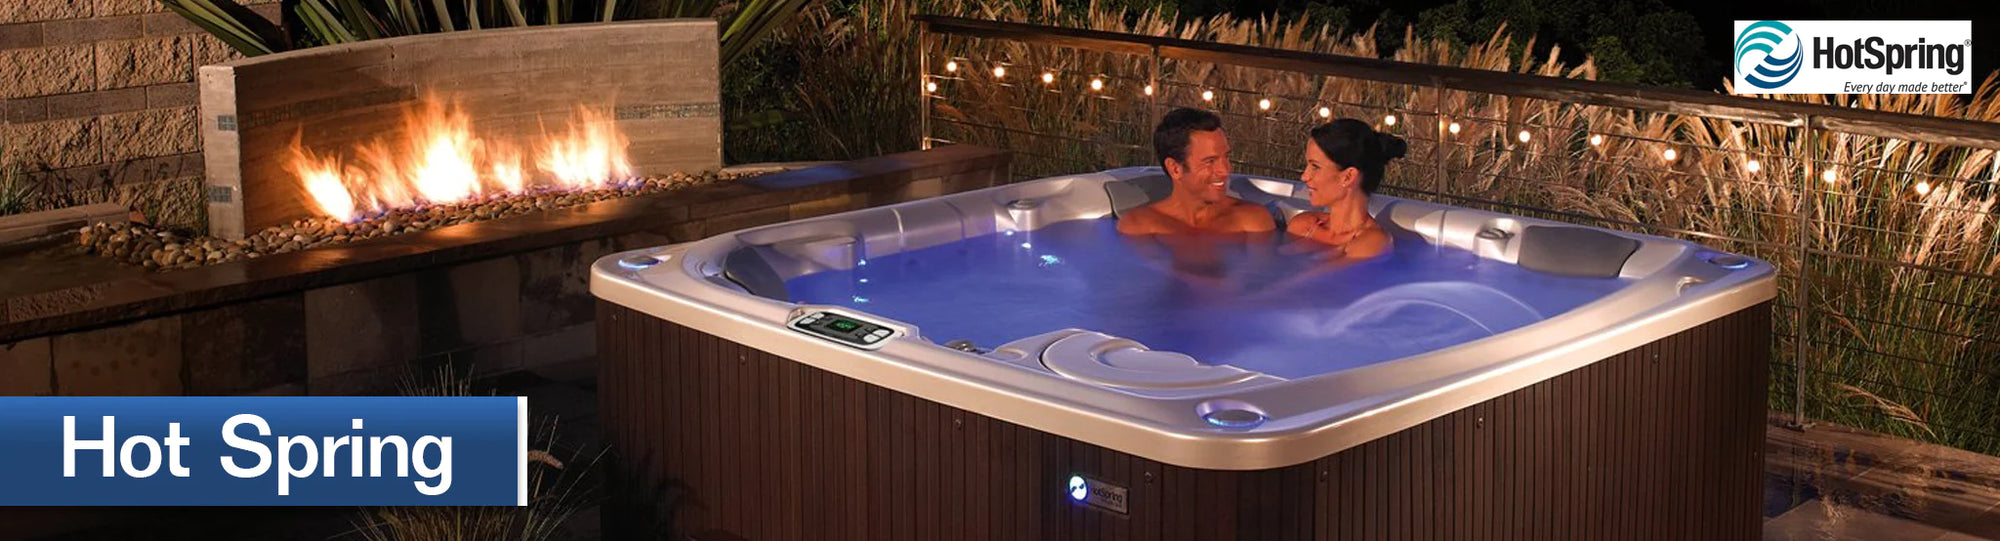 Hot Tub Wellness: Dive into Relaxation and Rejuvenation!